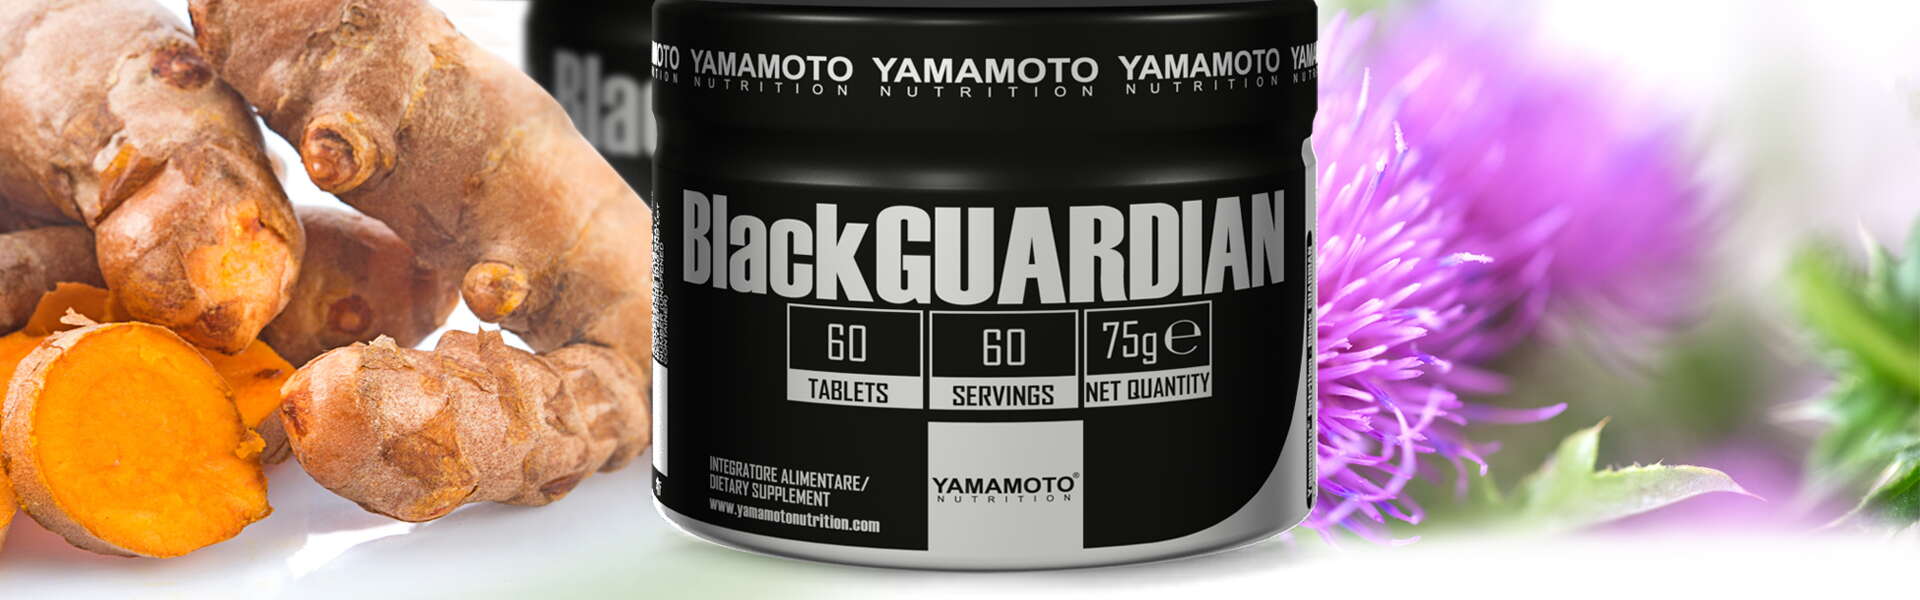 Black Guardian: let's purify ourselves. The body will thank you!